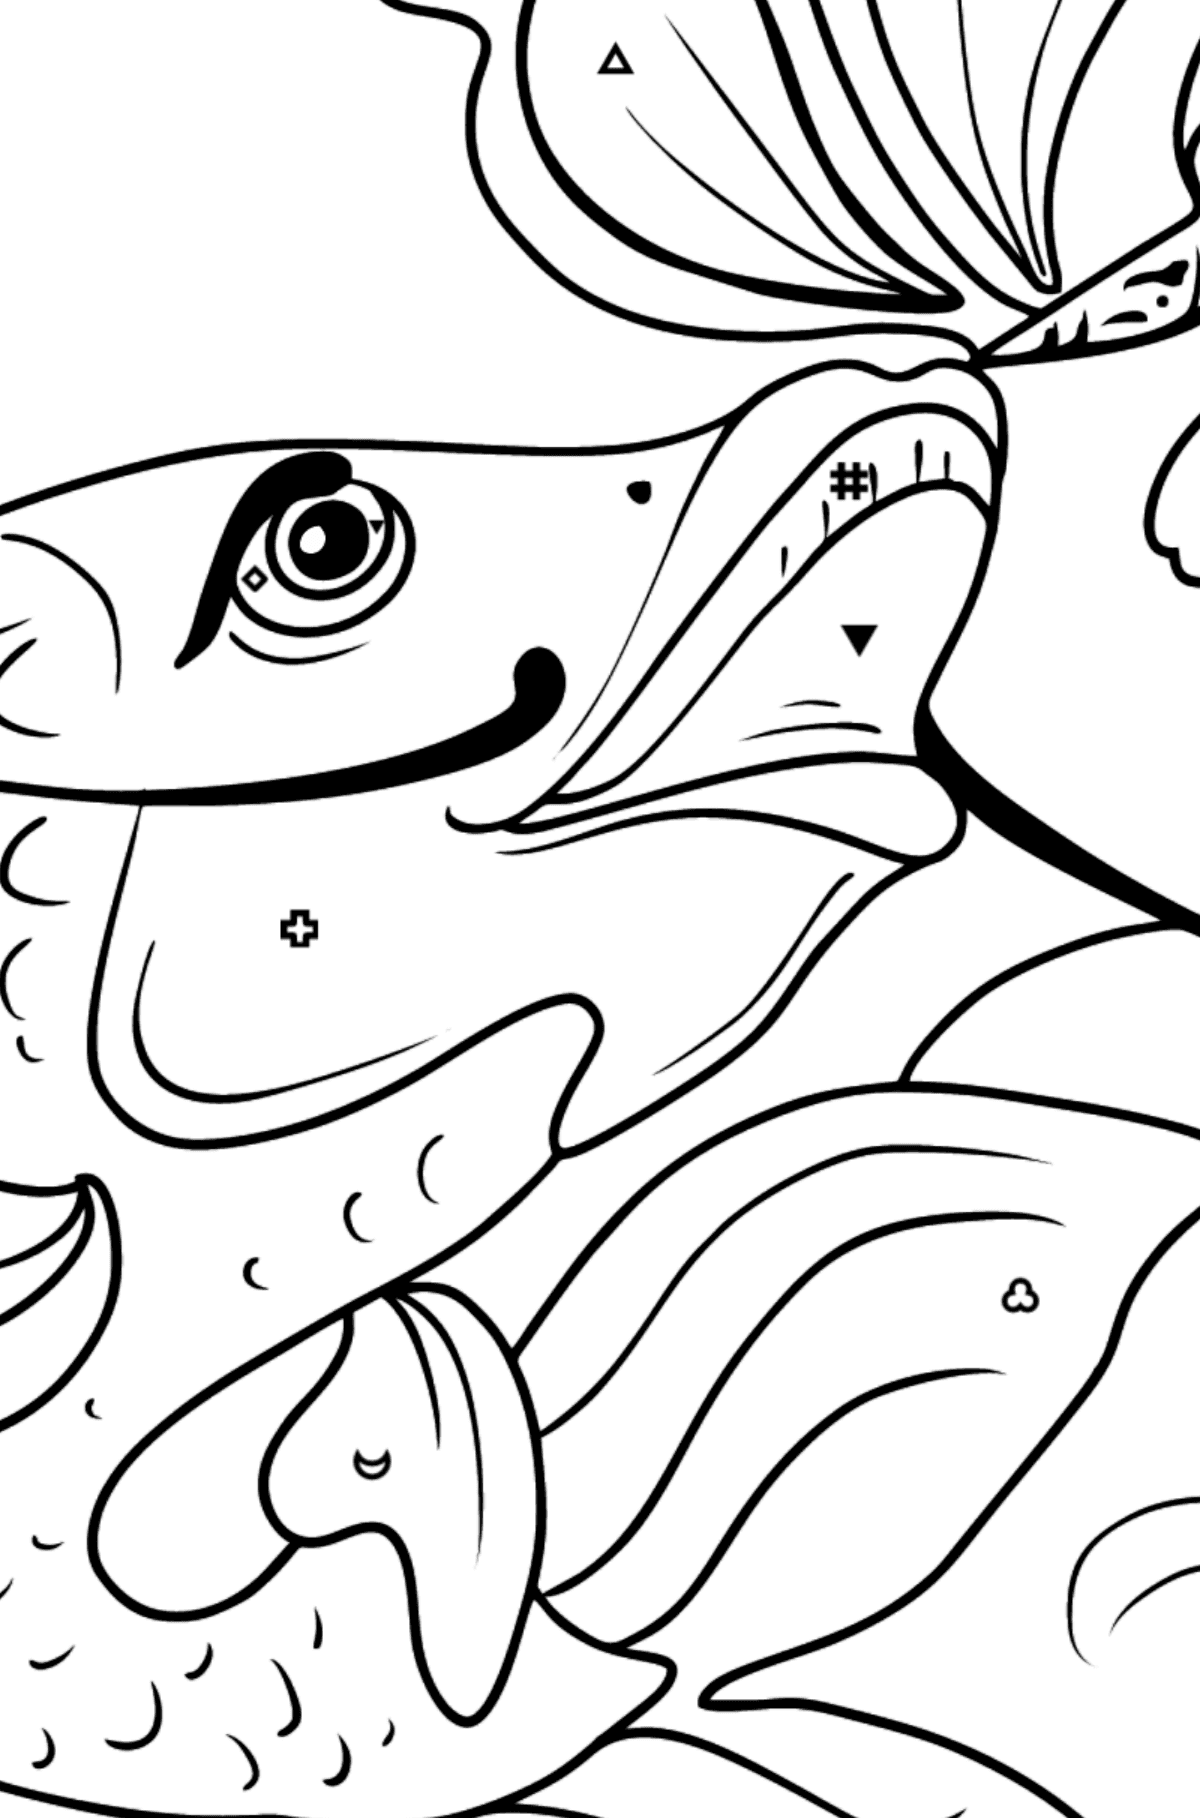 Fish and Butterfly coloring page - Coloring by Symbols and Geometric Shapes for Kids